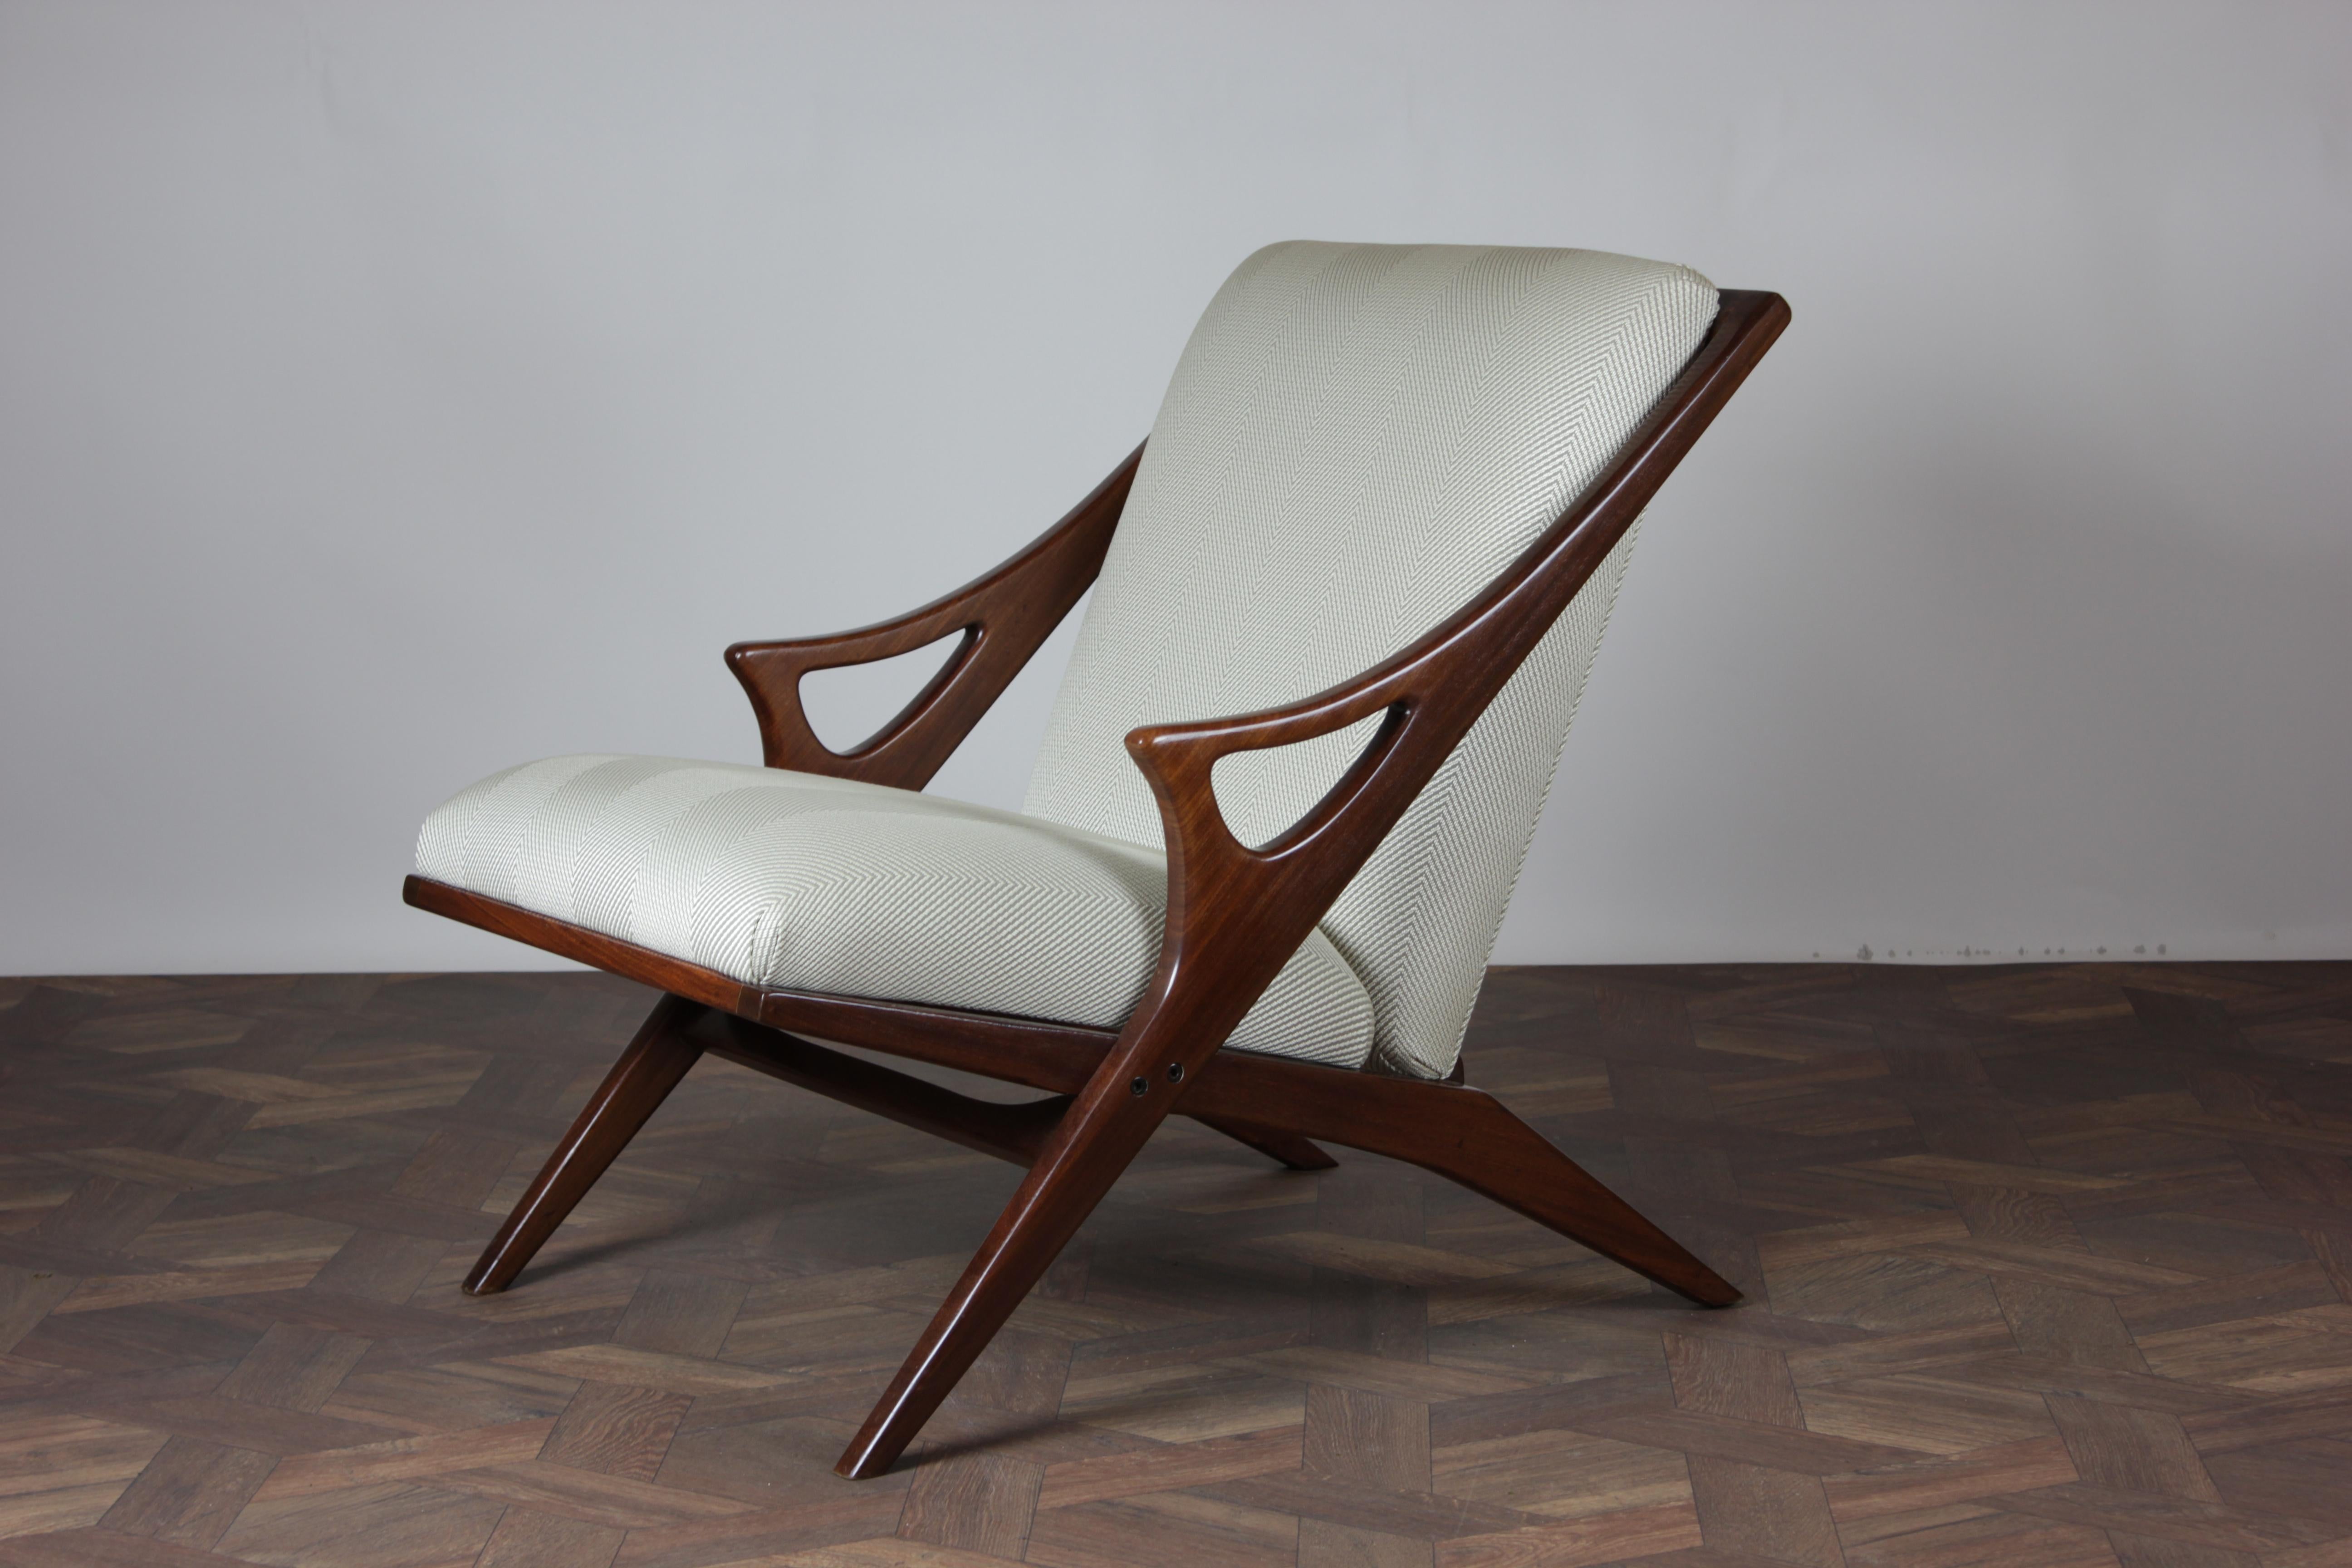 Introducing the Mid Century Modern Armchair by Arne Hovmand-Olsen for Mogens Kold, a timeless masterpiece from the 1950s that has been lovingly restored and newly upholstered to bring its iconic design back to life. This exceptional piece of